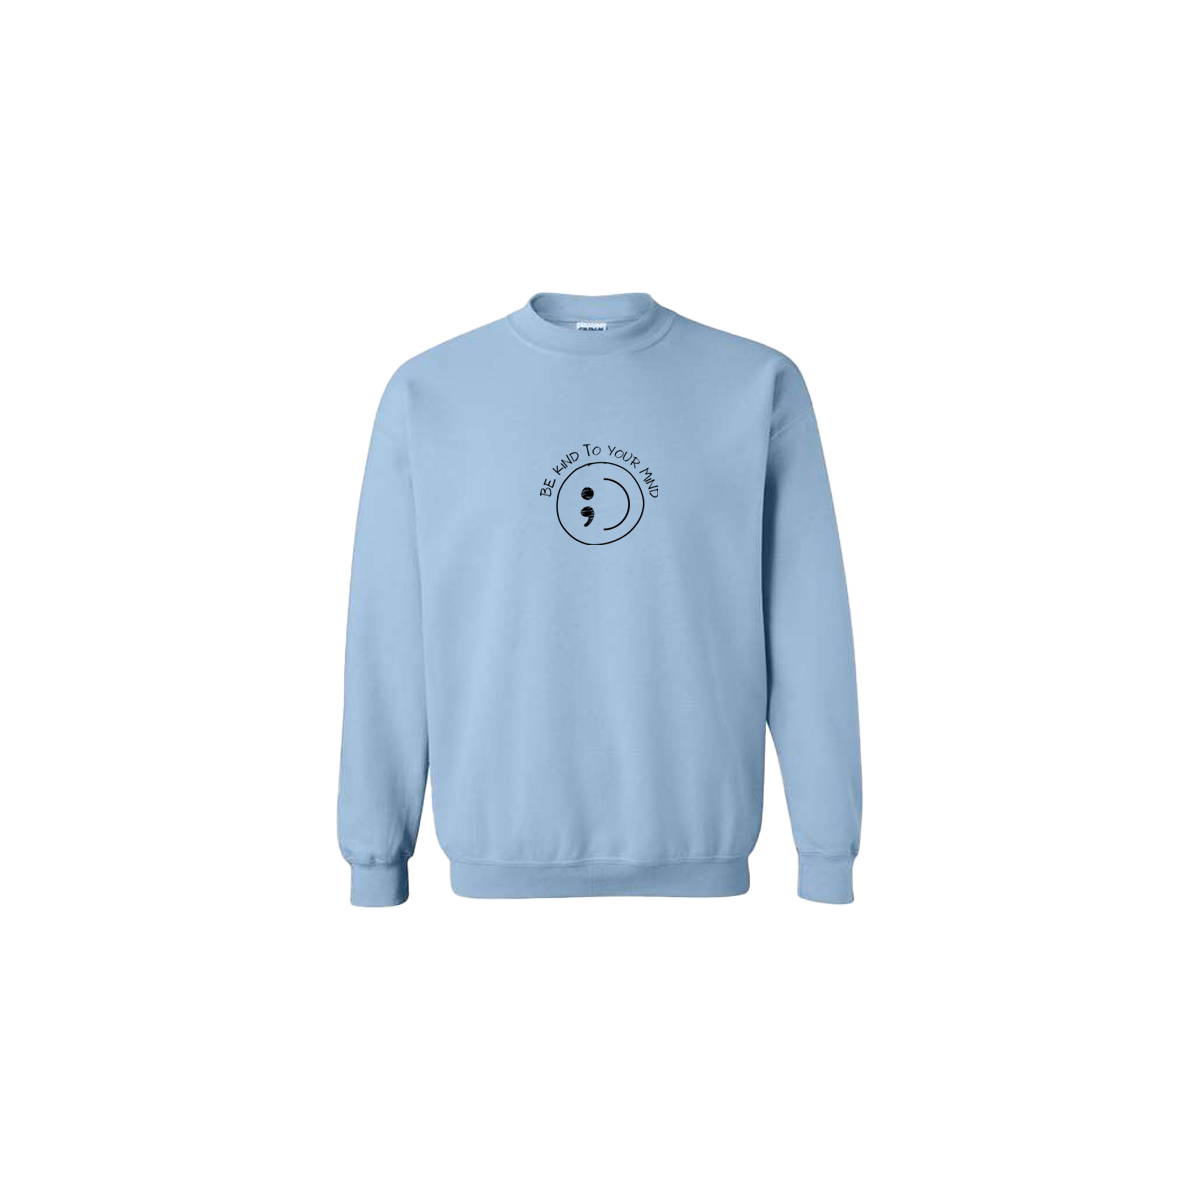 Be Kind To Your Mind Smiley Face Embroidered Light Blue Crewneck - Mental Health Awareness Clothing